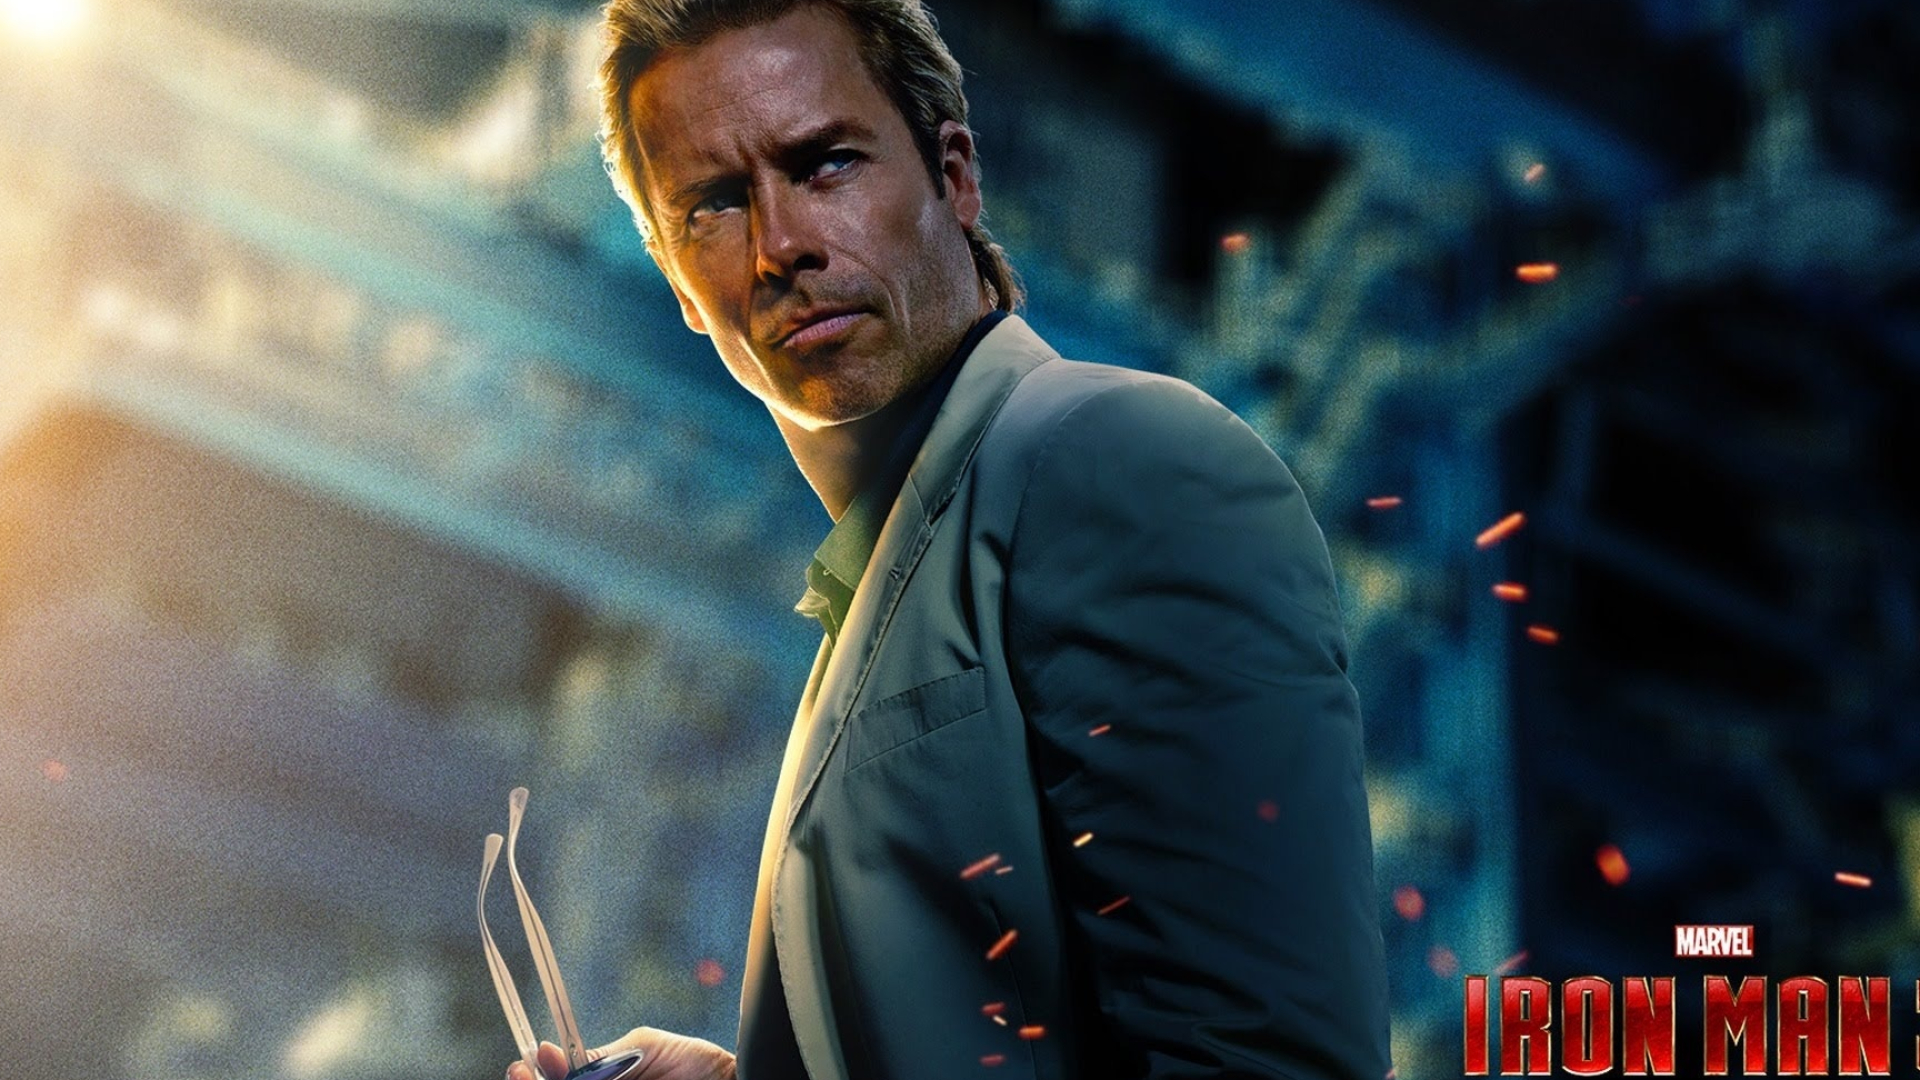 Guy Pearce, HD wallpapers, Visual appeal, Unique backgrounds, 1920x1080 Full HD Desktop